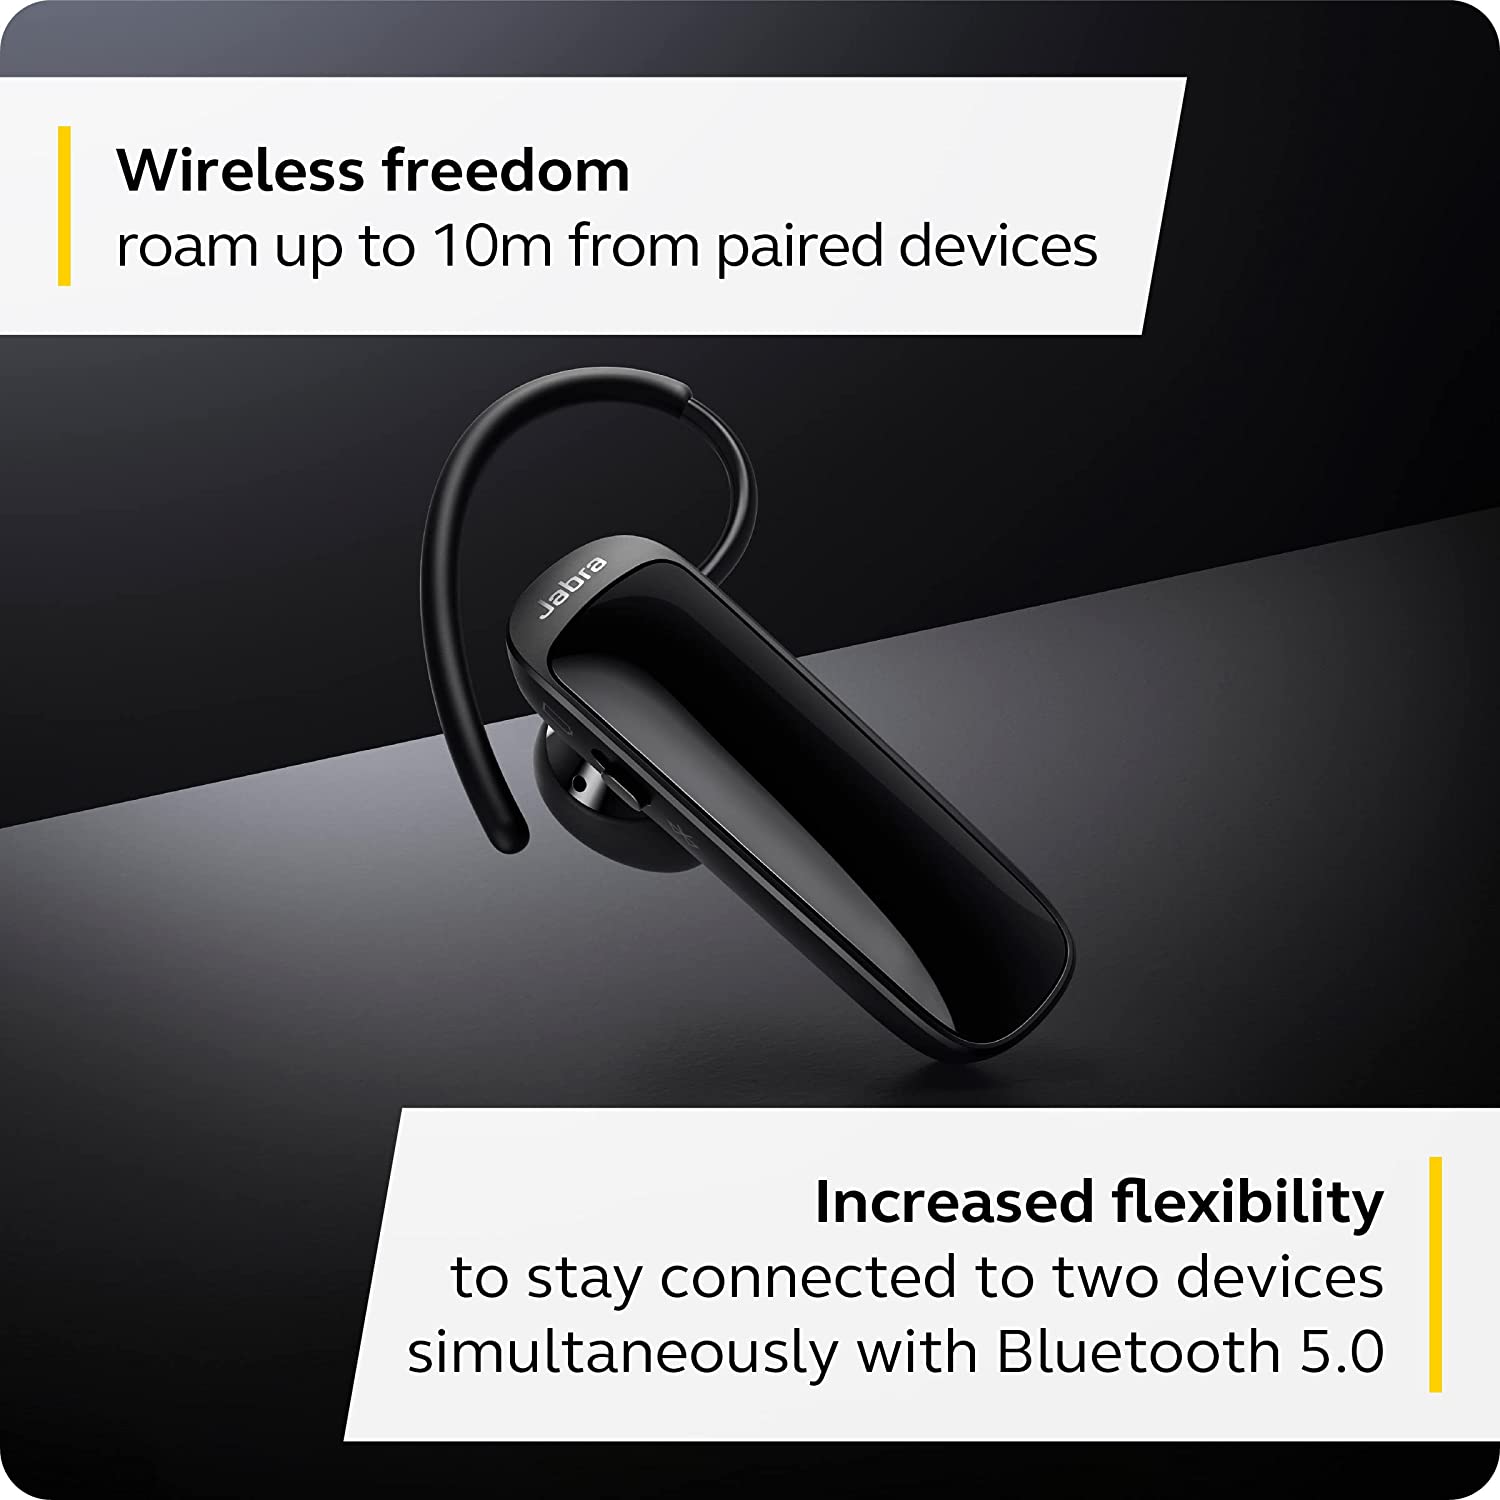 Jabra Talk 25 SE Mono Bluetooth Headset – Wireless Single Ear Headset with Built-in Microphone, Media Streaming, up to 9 Hours Talk Time